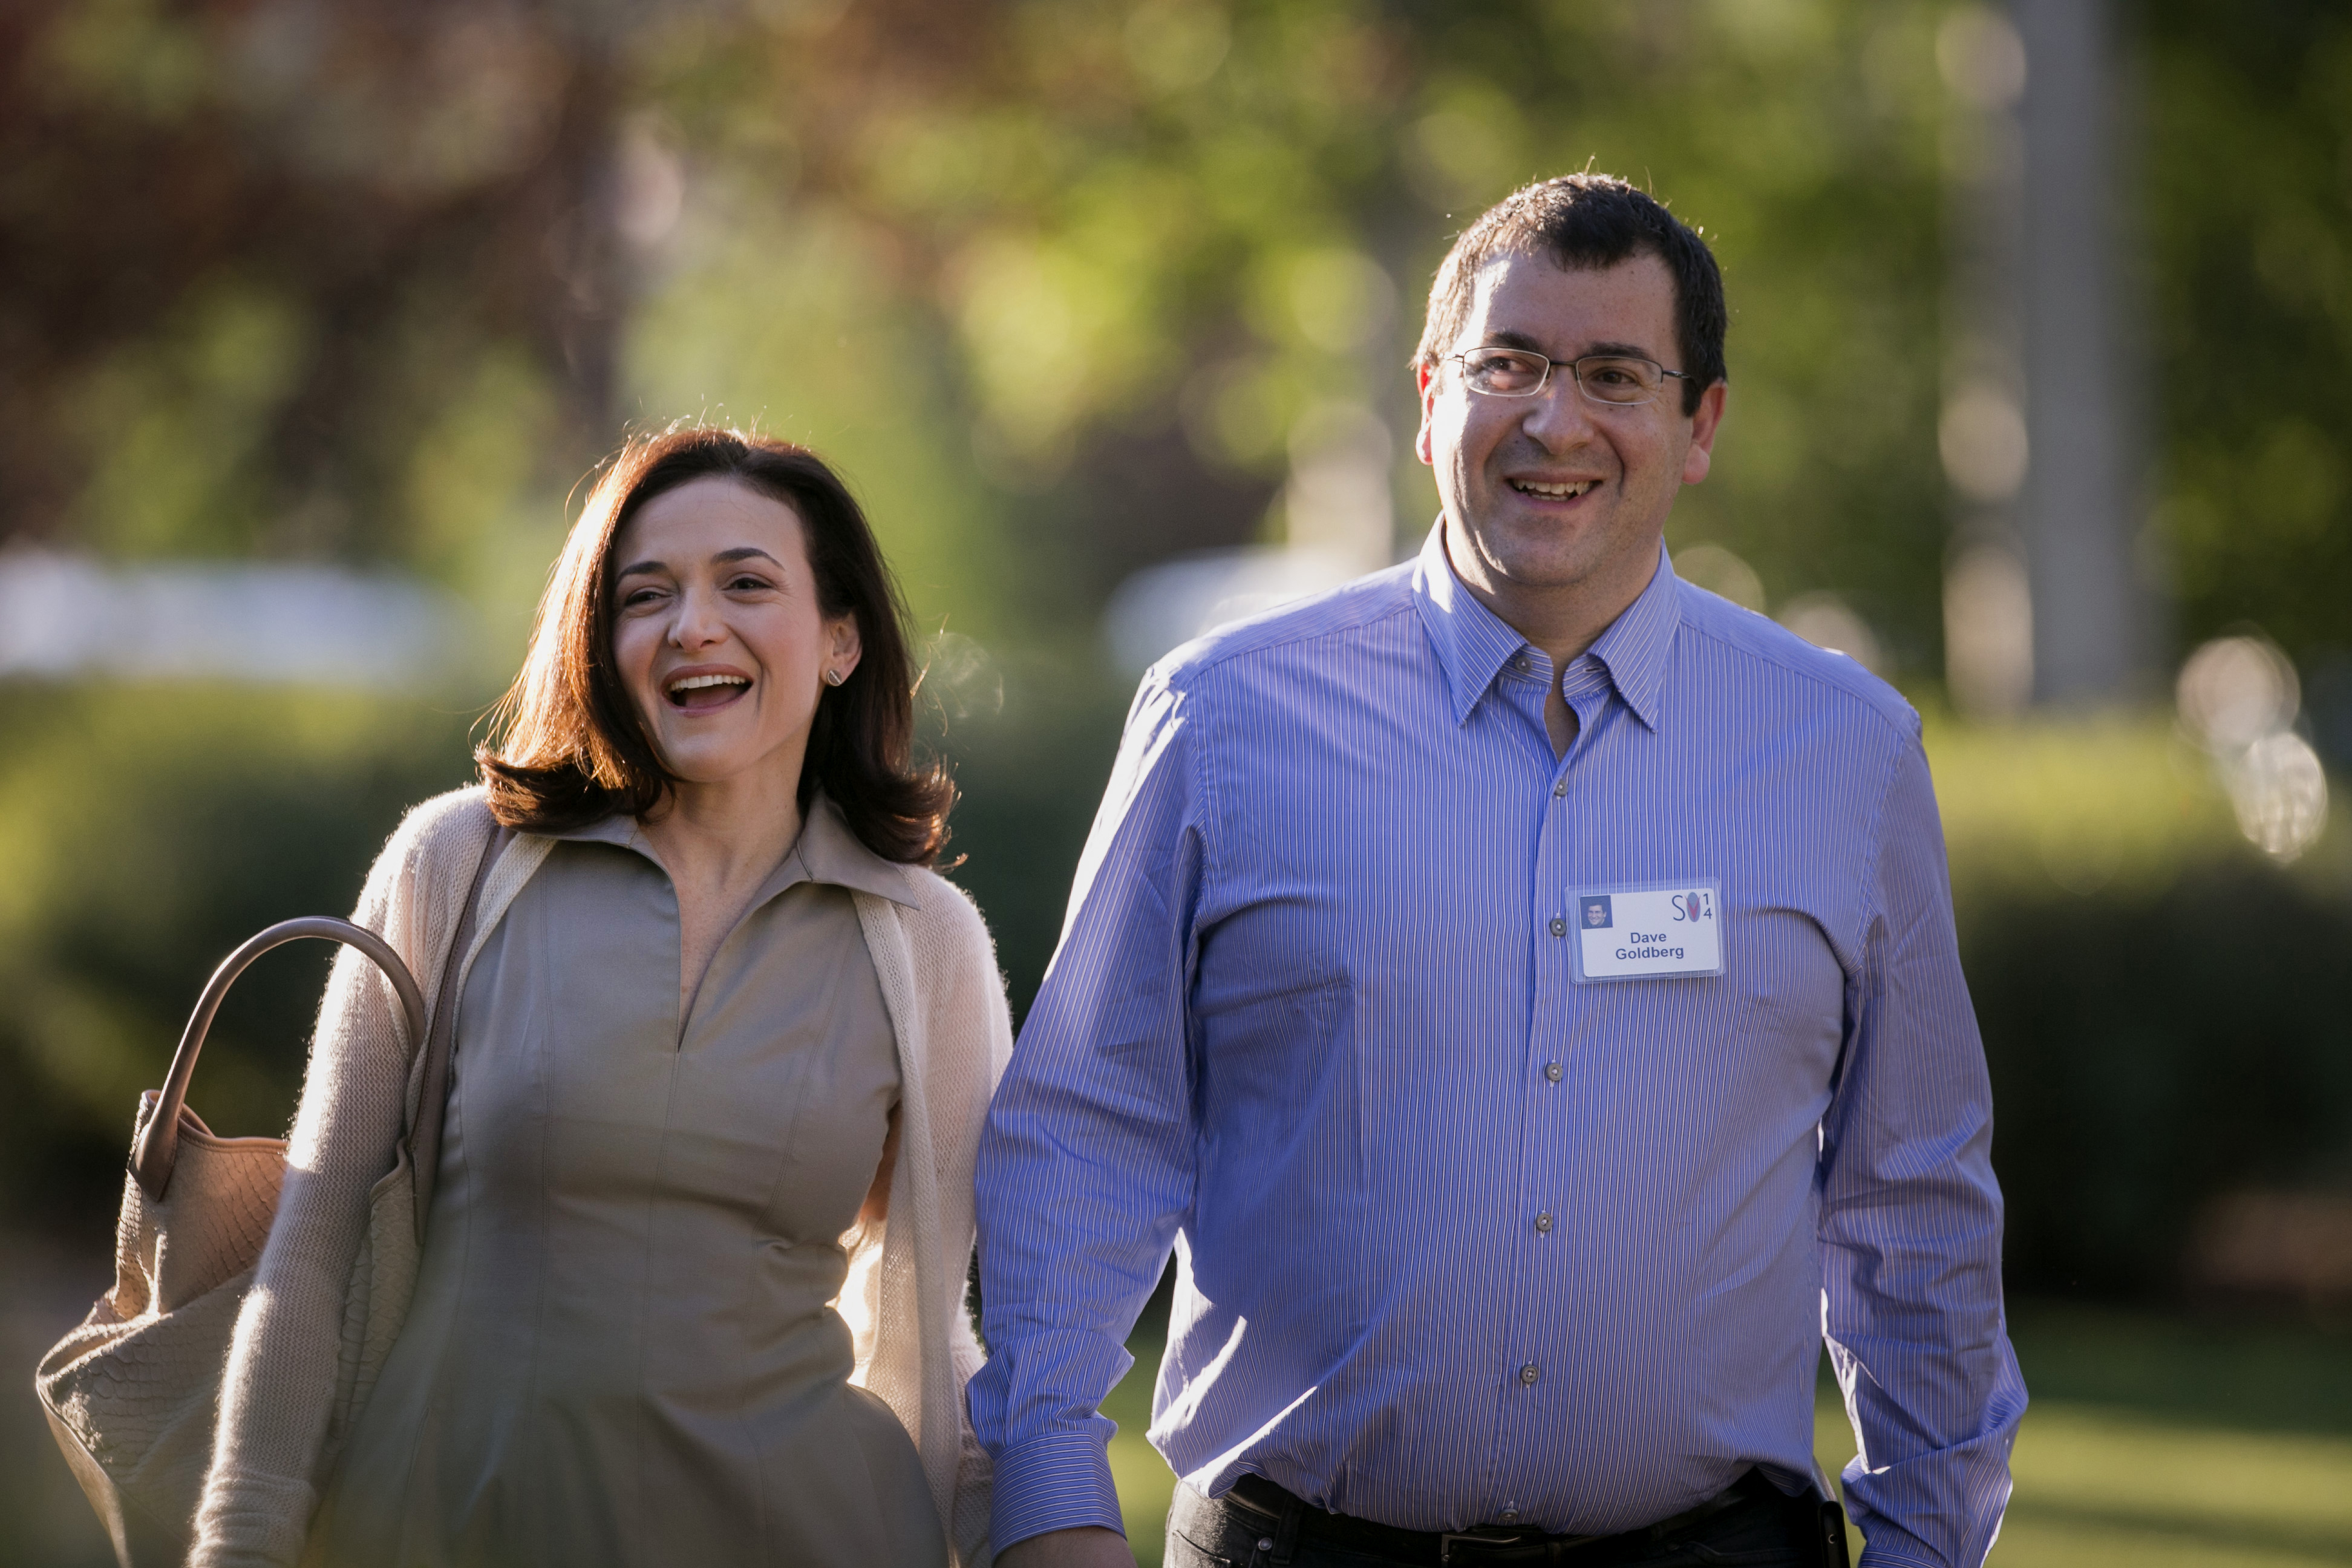 Sheryl Sandberg, chief operating officer of Facebook Inc., left, and her late husband David Goldberg, chief executive officer of SurveyMonkey, arrive to a morning session at the Sun Valley Lodge during the Allen & Co. Media and Technology Conference in Sun Valley, Idaho, on July 9, 2014. (Scott Eells—Bloomberg/Getty Images)